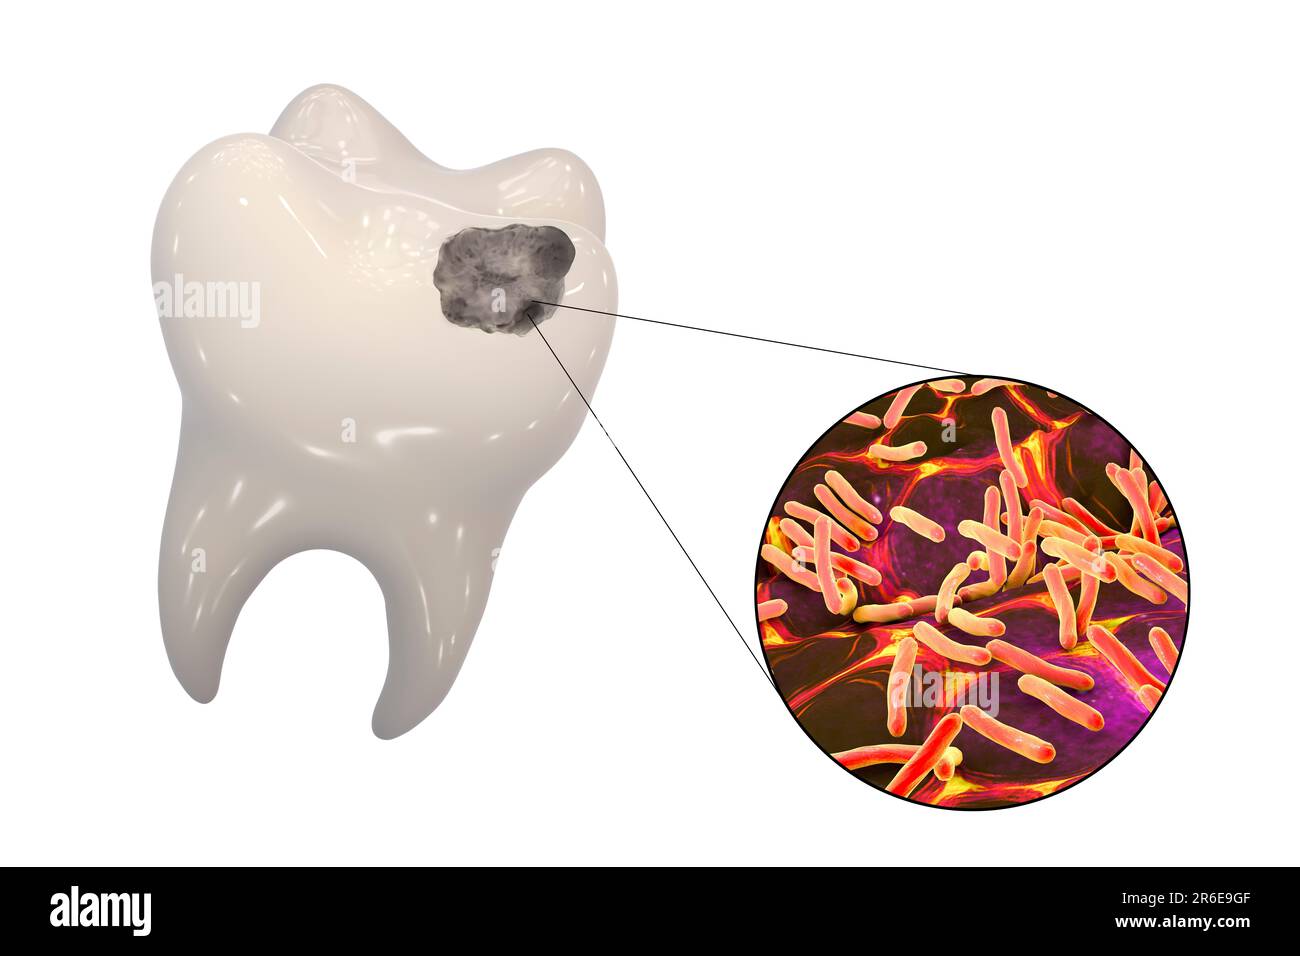 Tooth decay. Computer artwork of a tooth with cavity and close-up view of bacteria which cause caries formation. Stock Photo